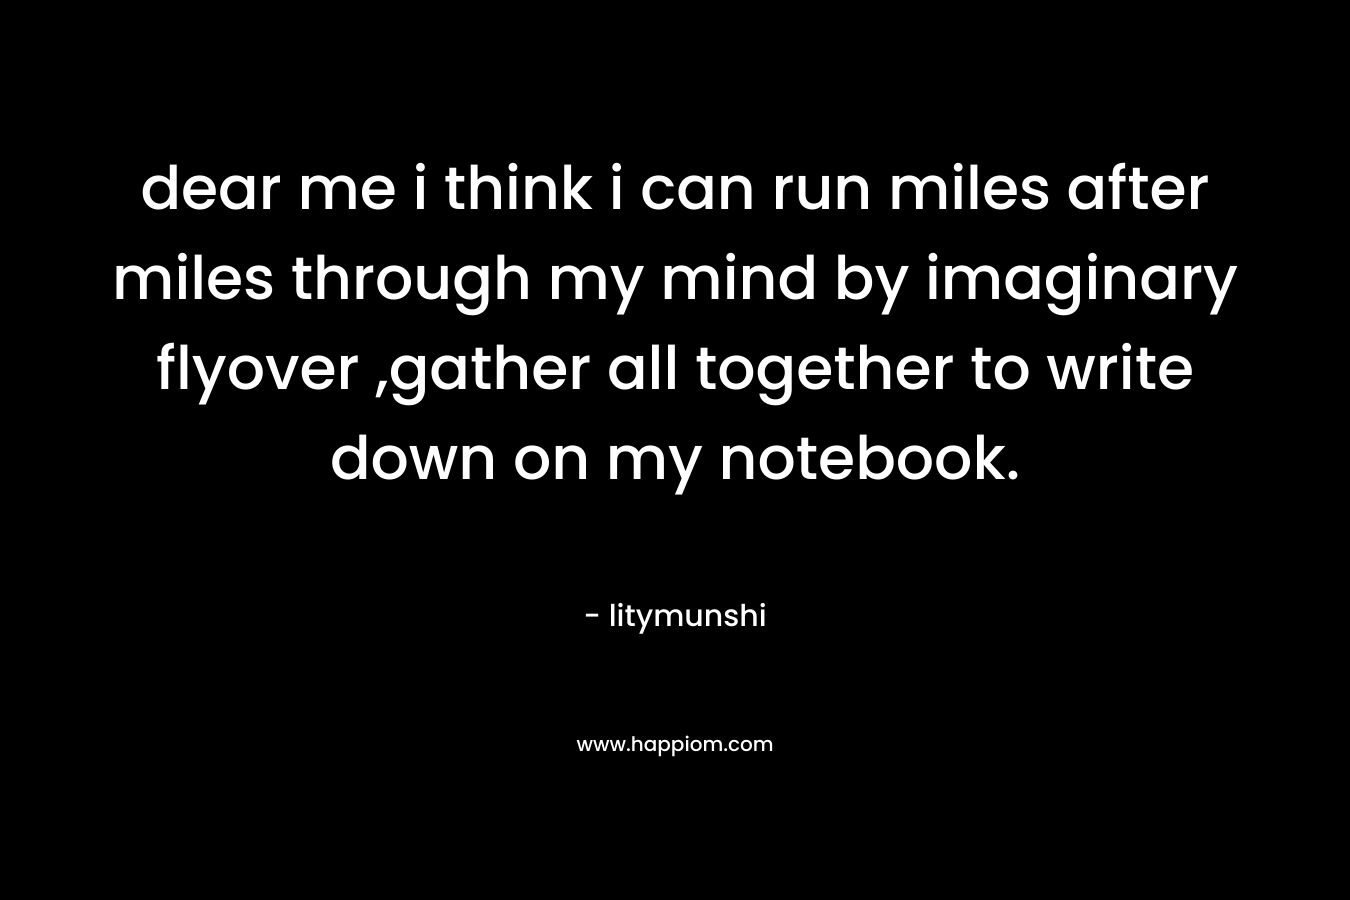 dear me i think i can run miles after miles through my mind by imaginary flyover ,gather all together to write down on my notebook.